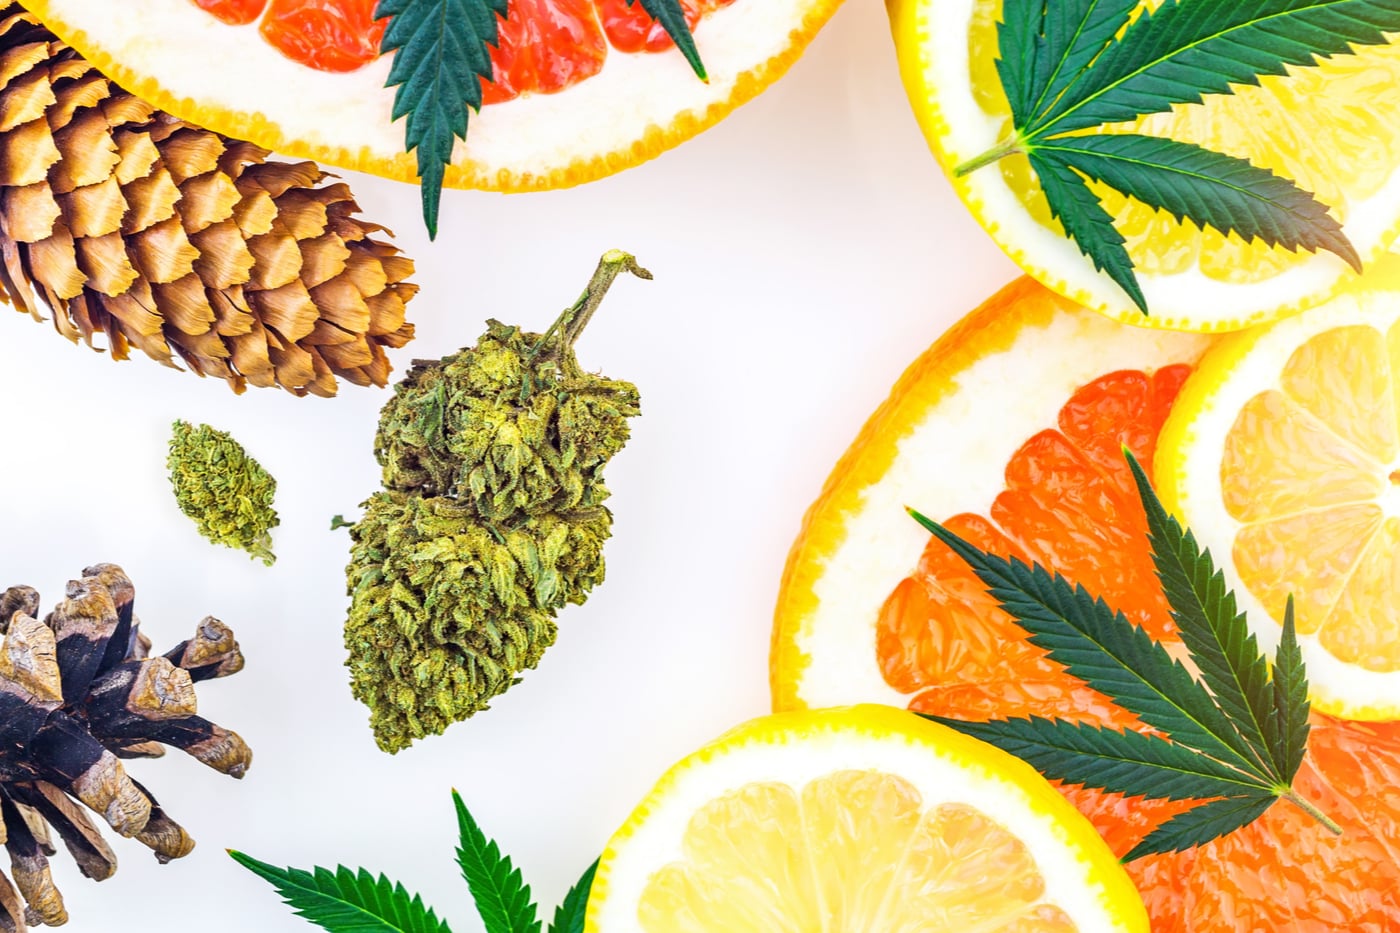 conifers, cannabis, and citrus terpenes that help define the differences between indica and sativa strains